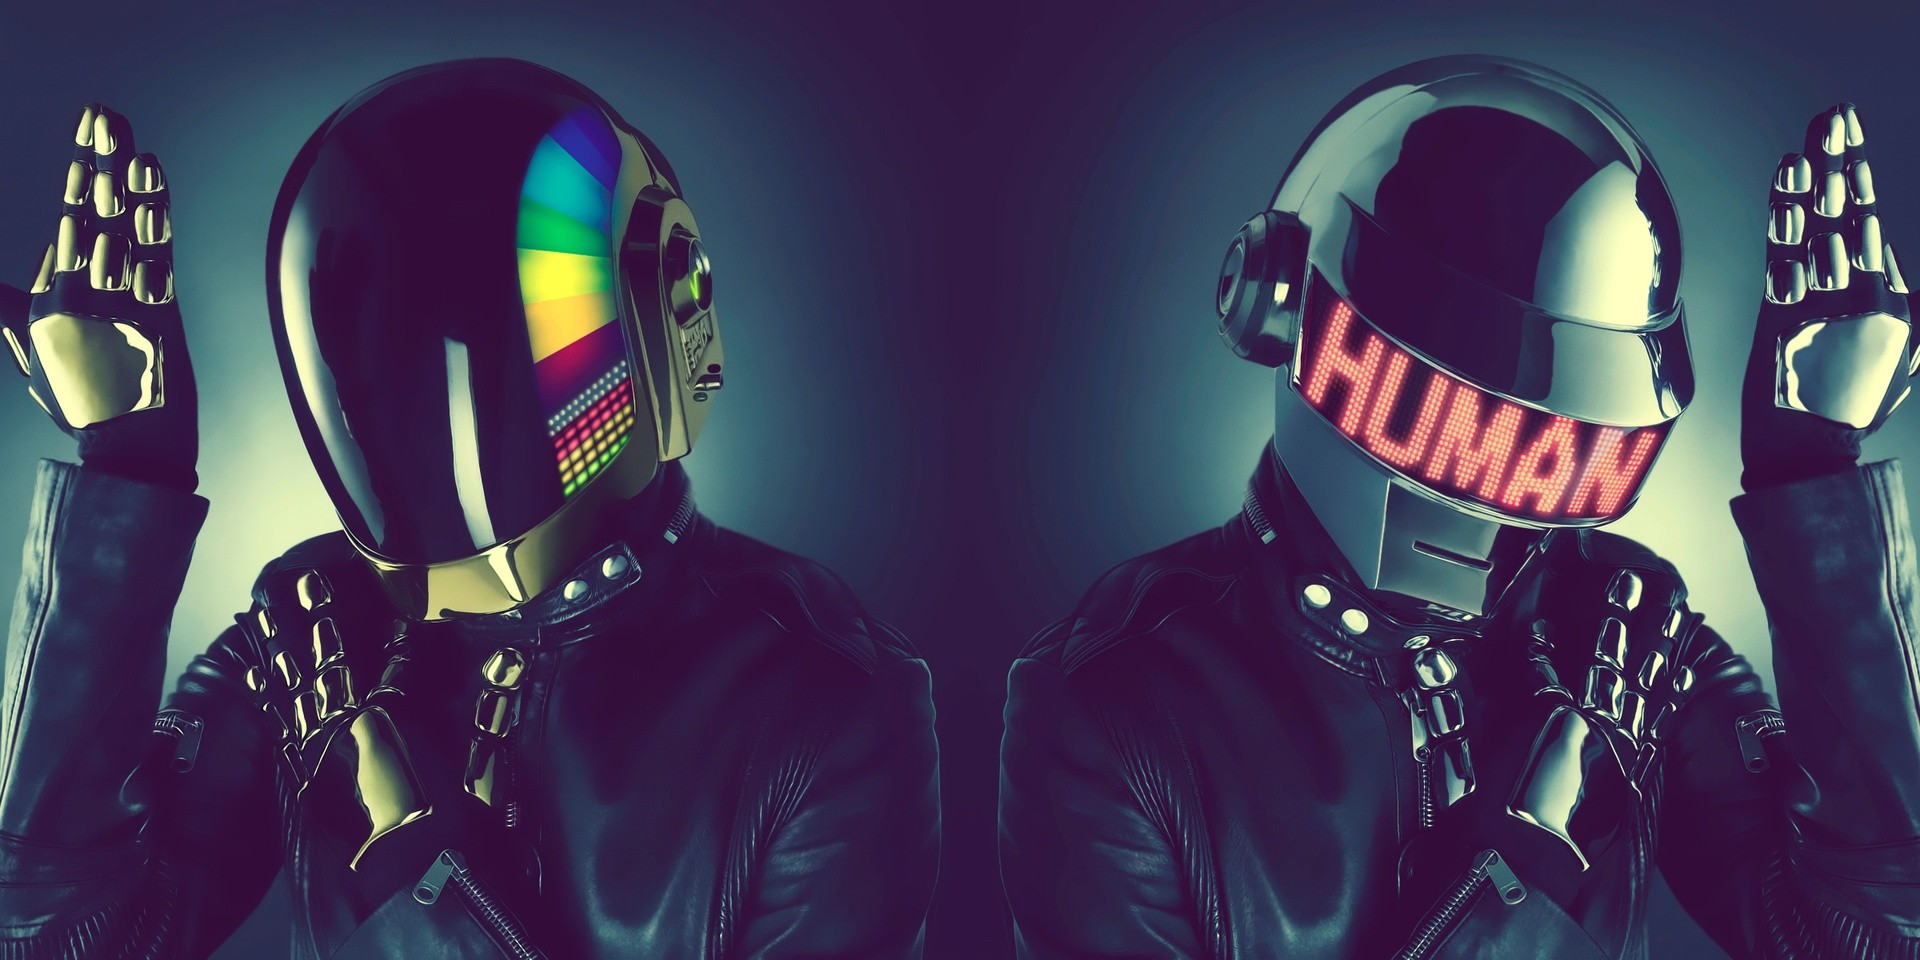 'Daft Klub', a tribute to French duo Daft Punk to be held in Jakarta